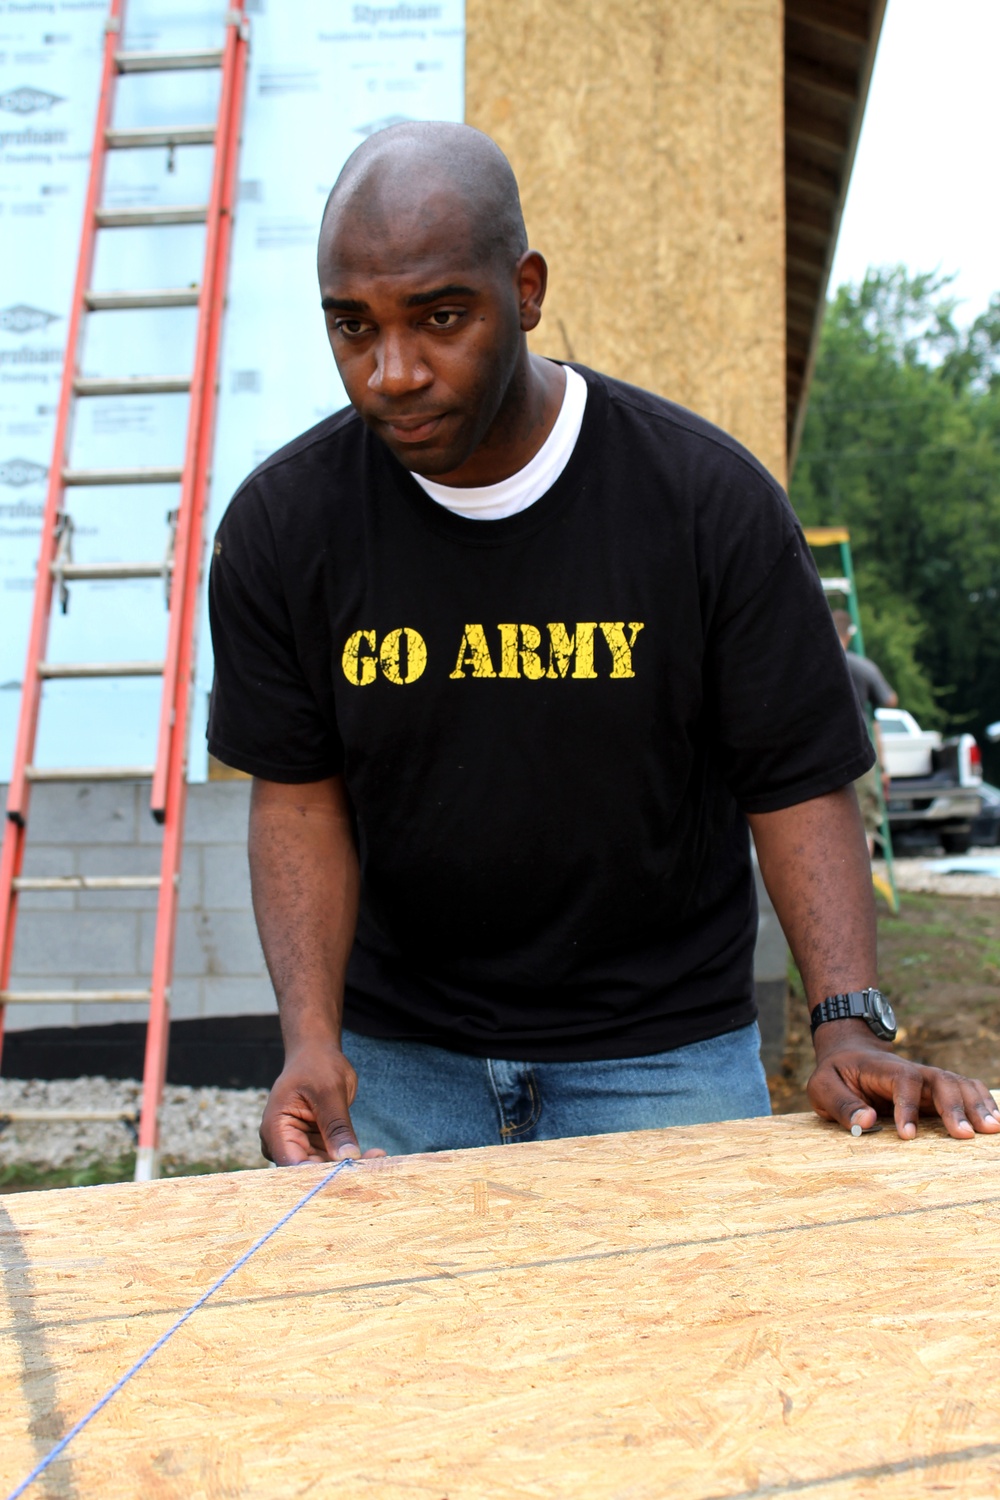 Fort Knox soldiers dress down to get dirty